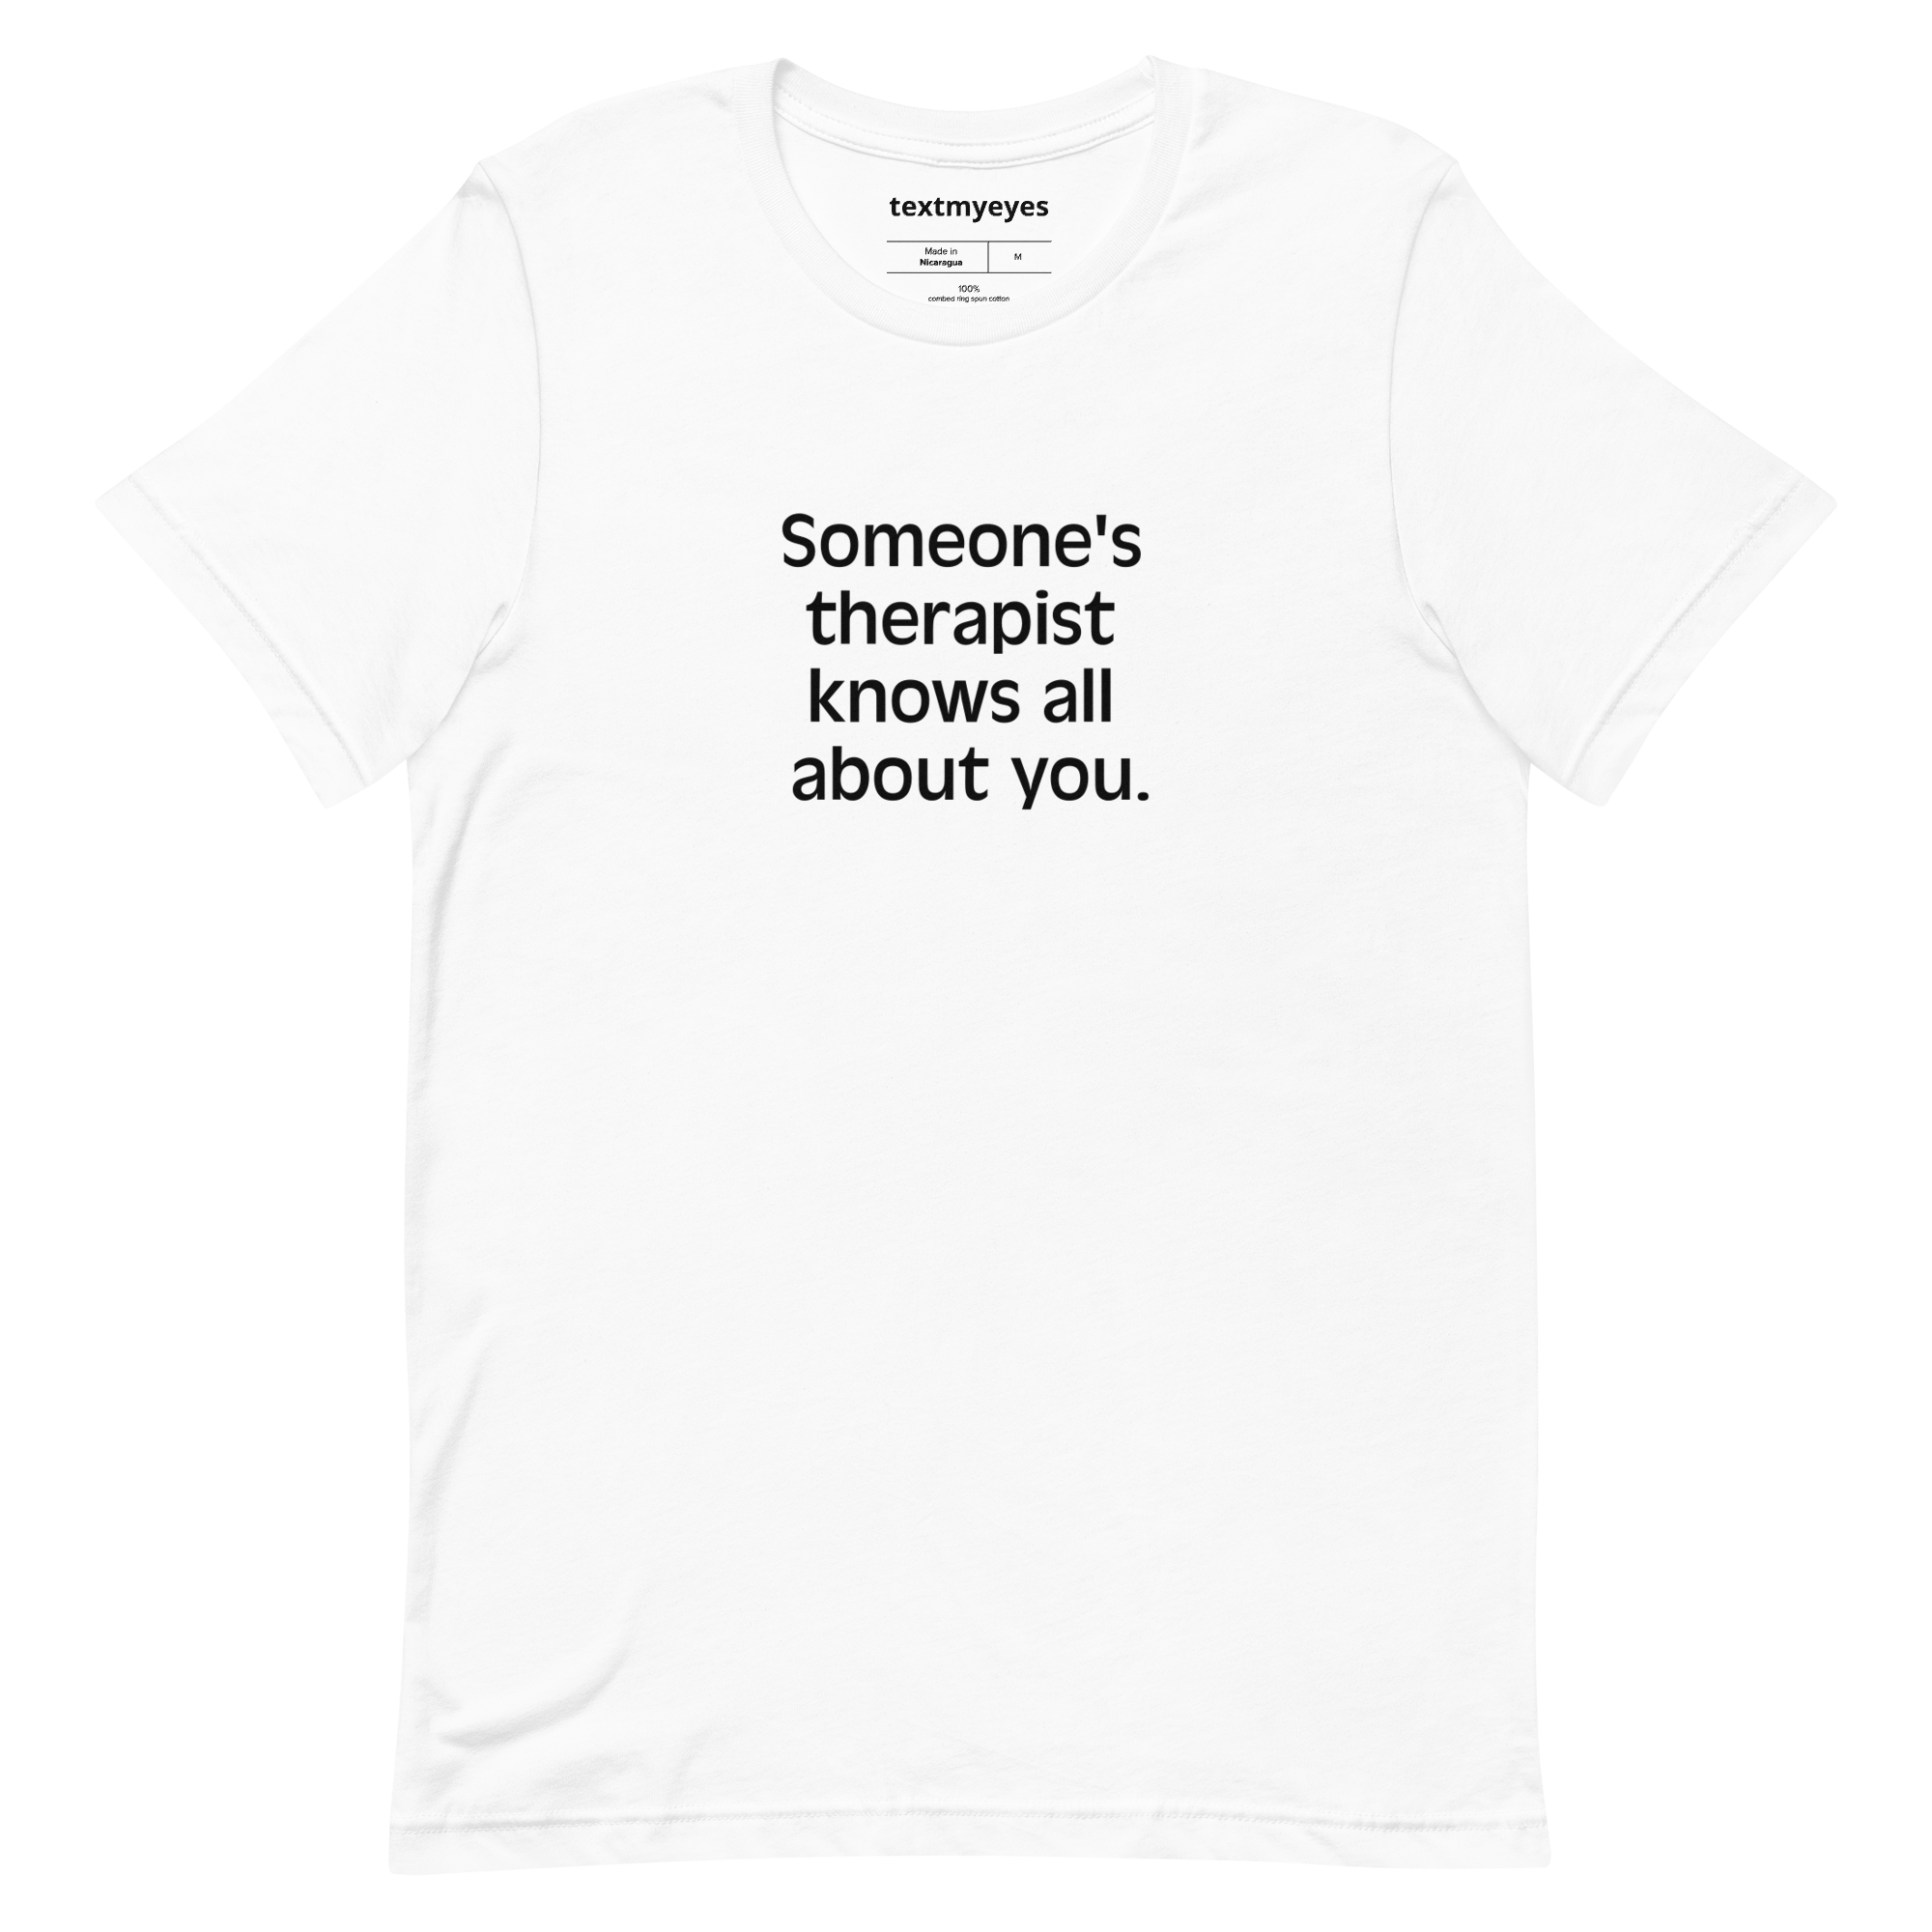 Someones's therapist knows all about you